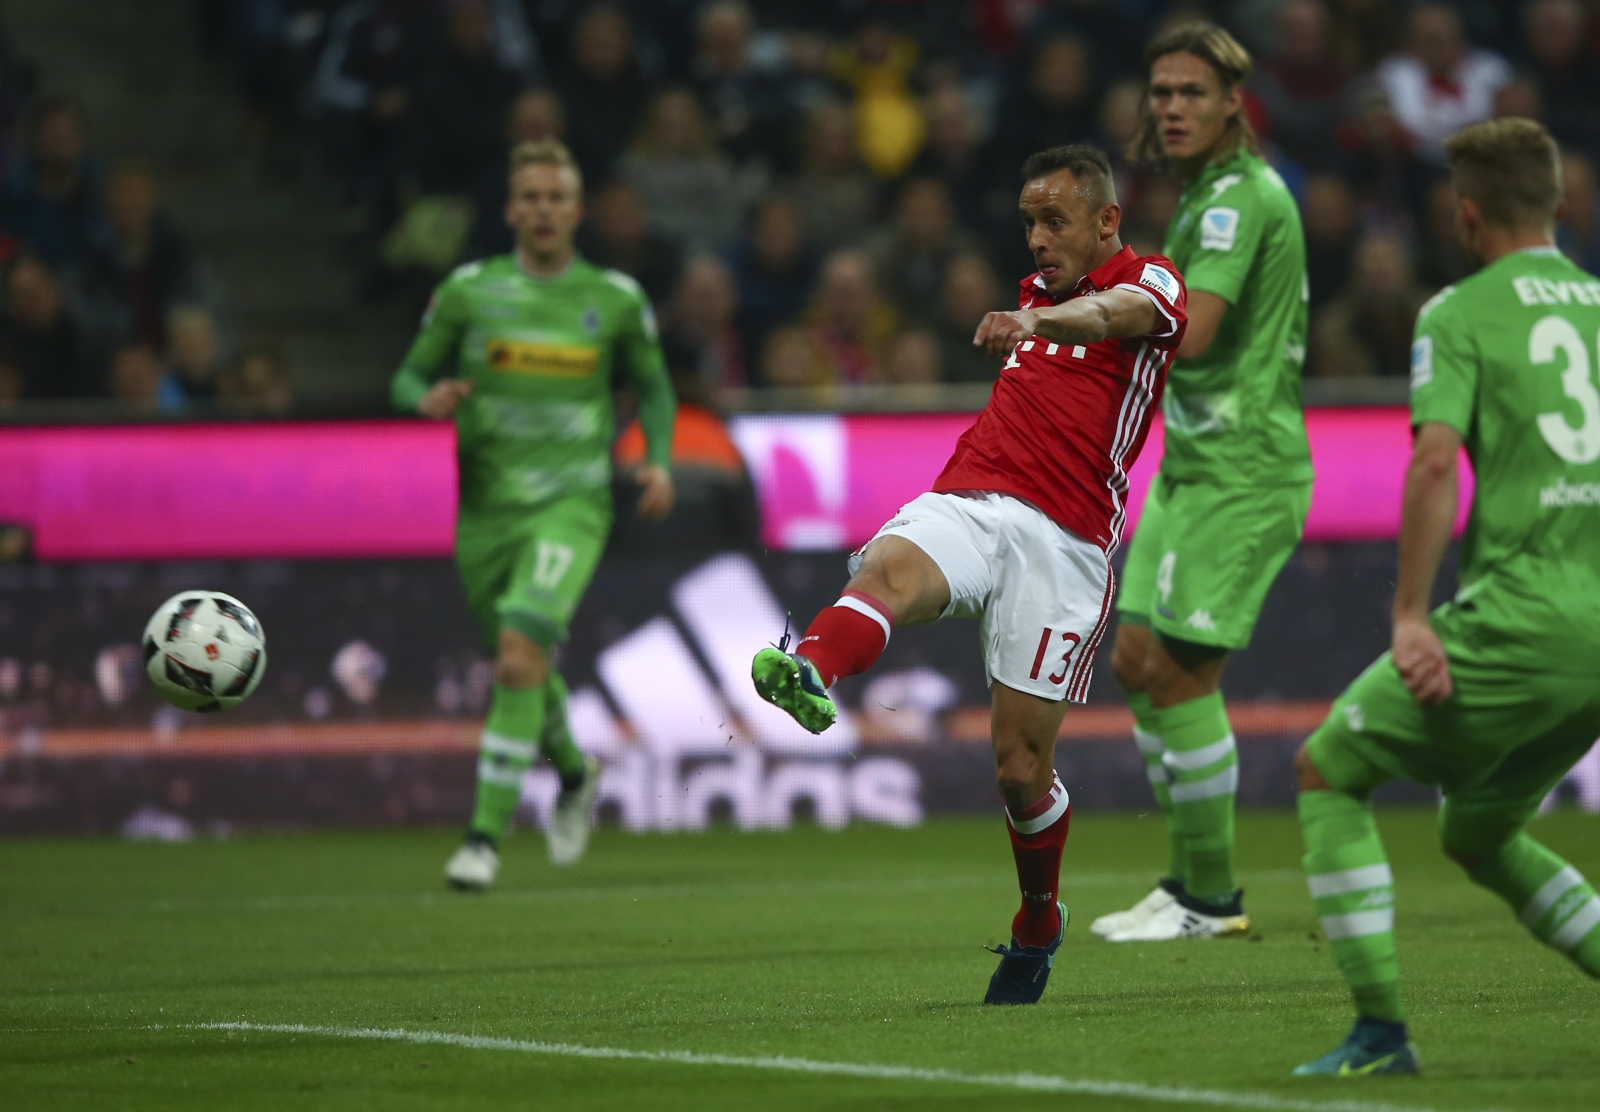 Rafinha confirms offers from Premier League clubs amid Arsenal and